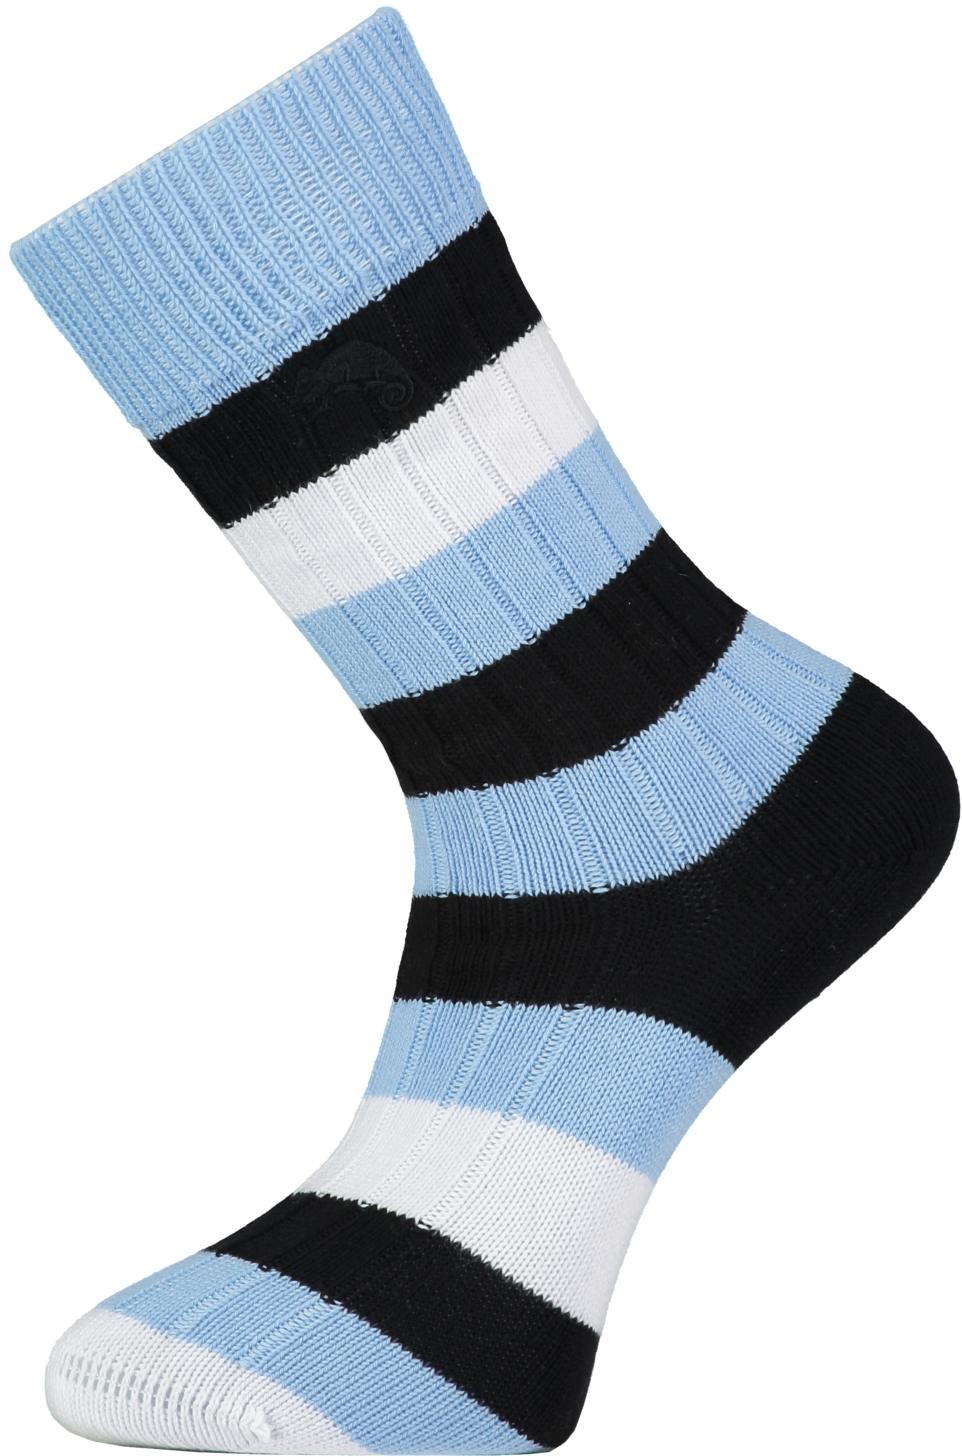 Blue, White And Black Striped Socks - Sock (1072x1500), Png Download